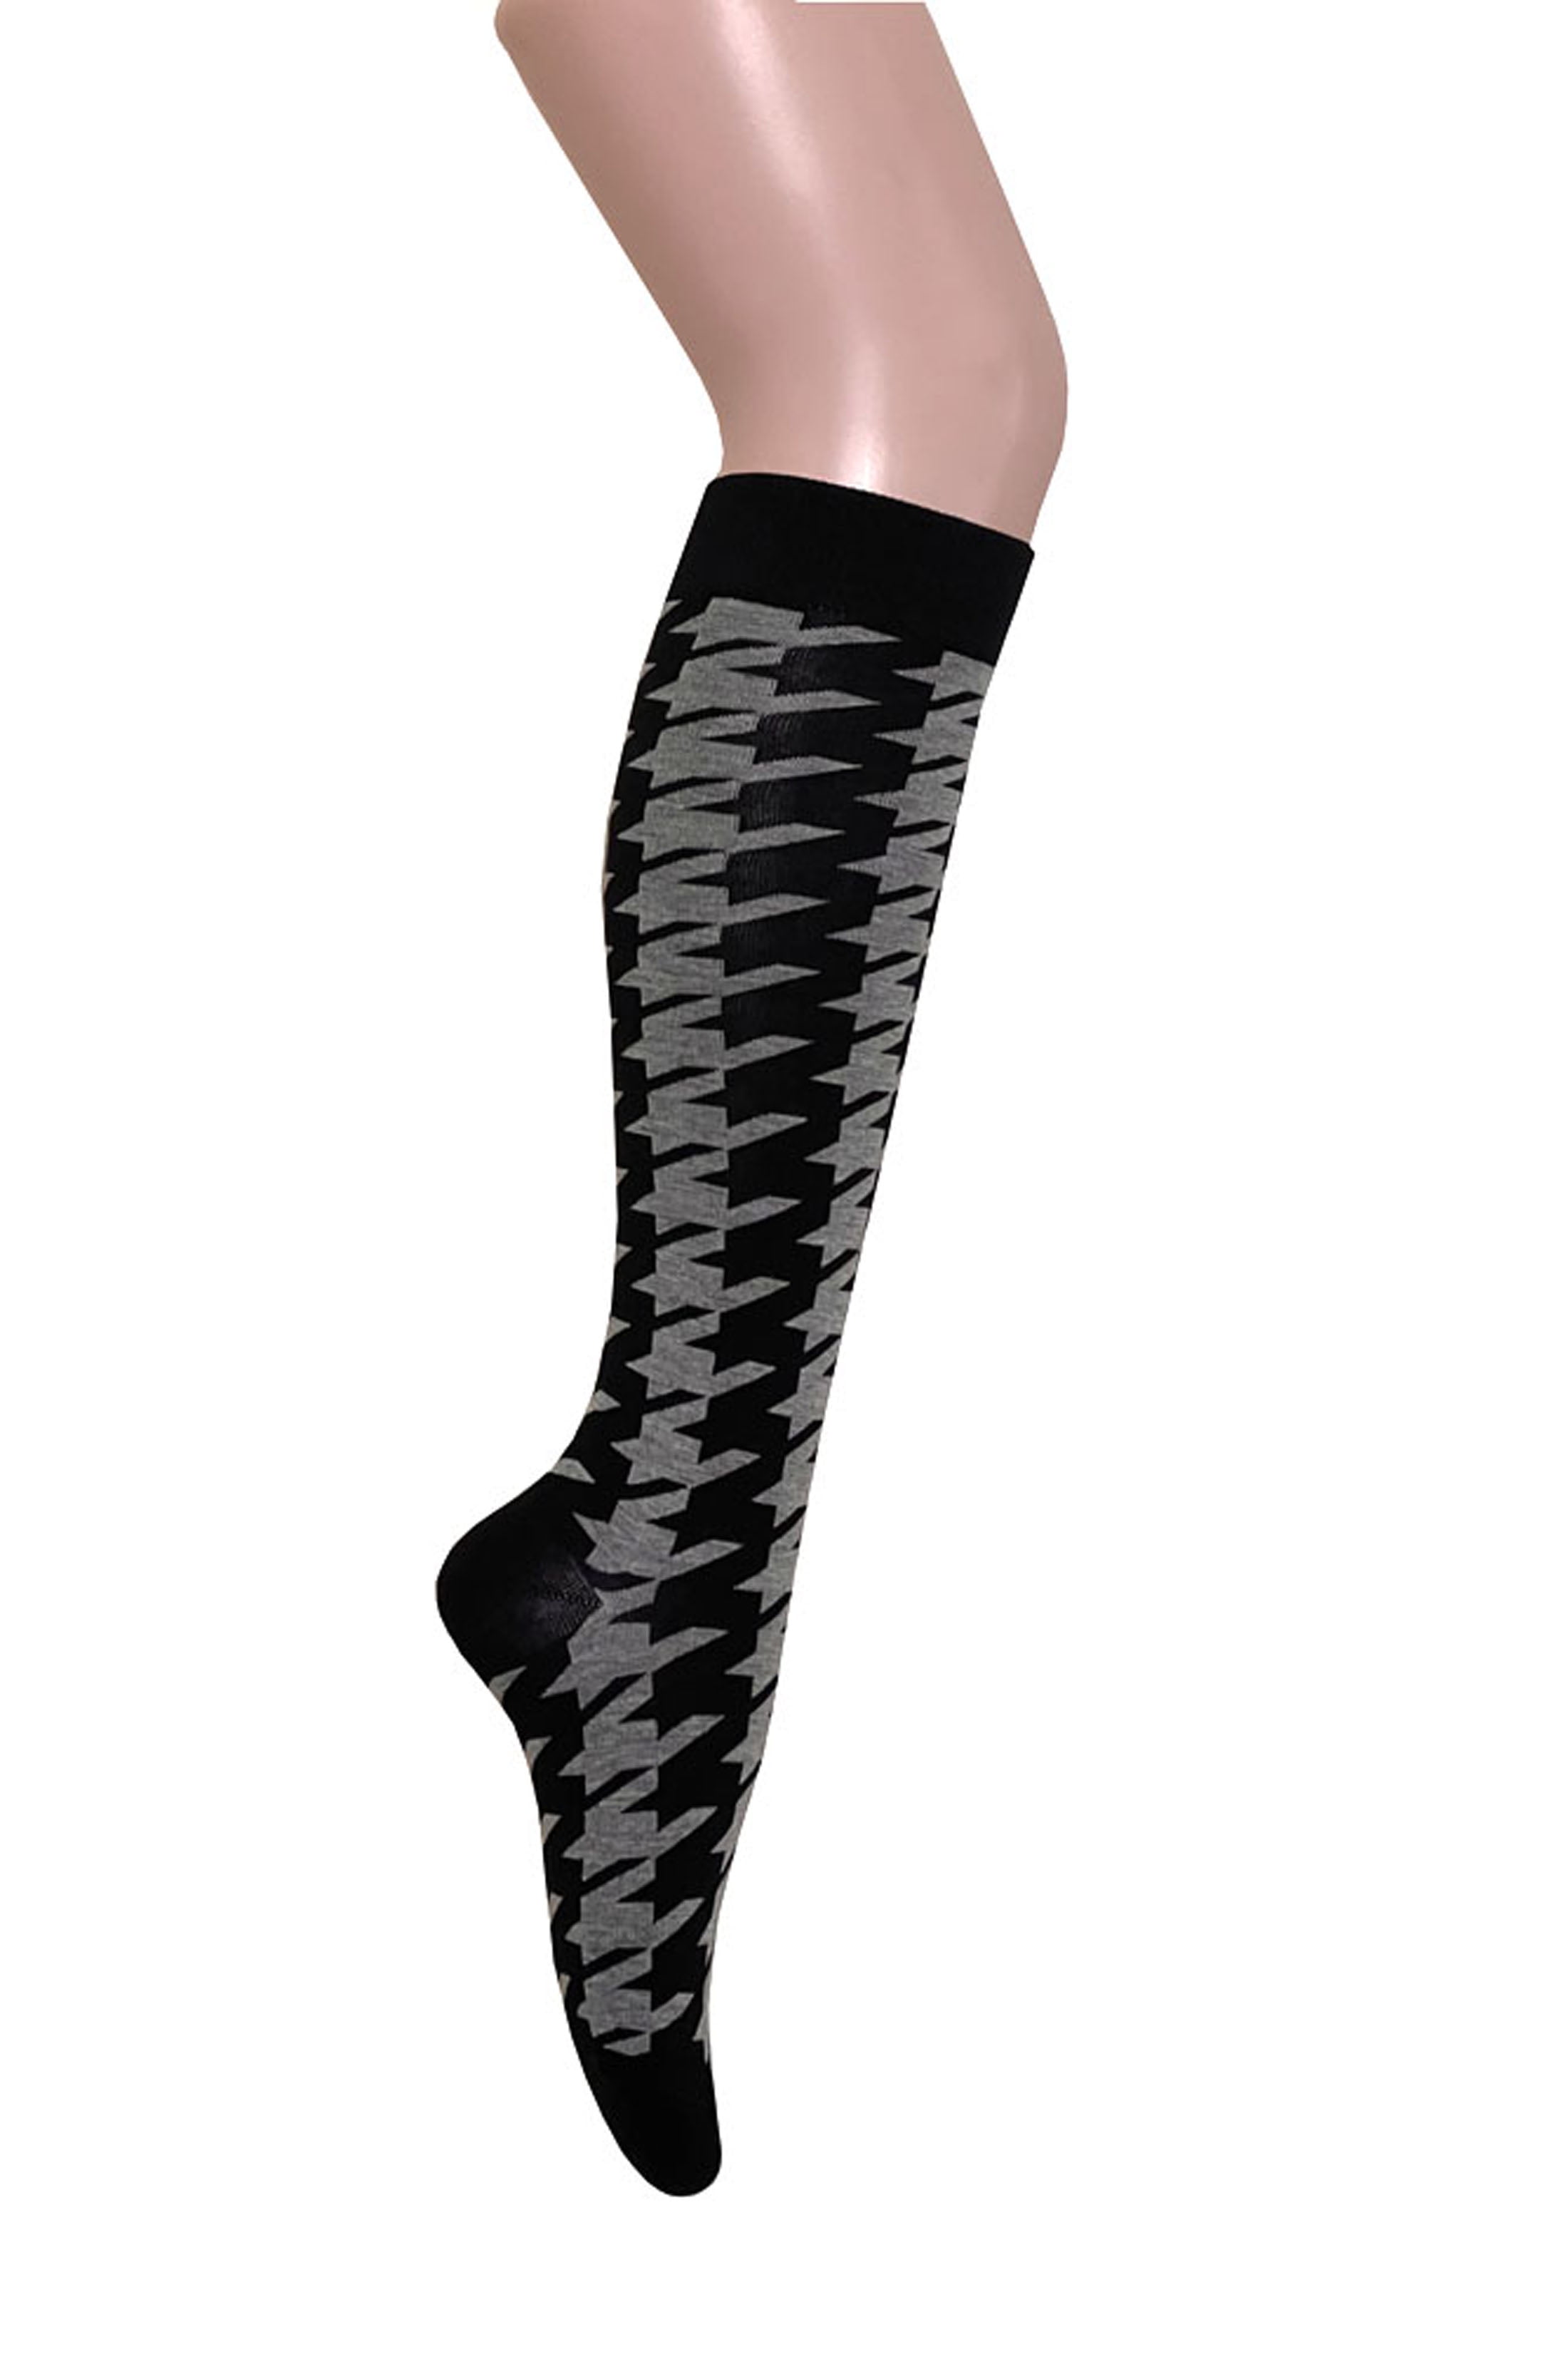 Novelty Houndstooth Pattern Women Knee High Tube Socks in Black with ...